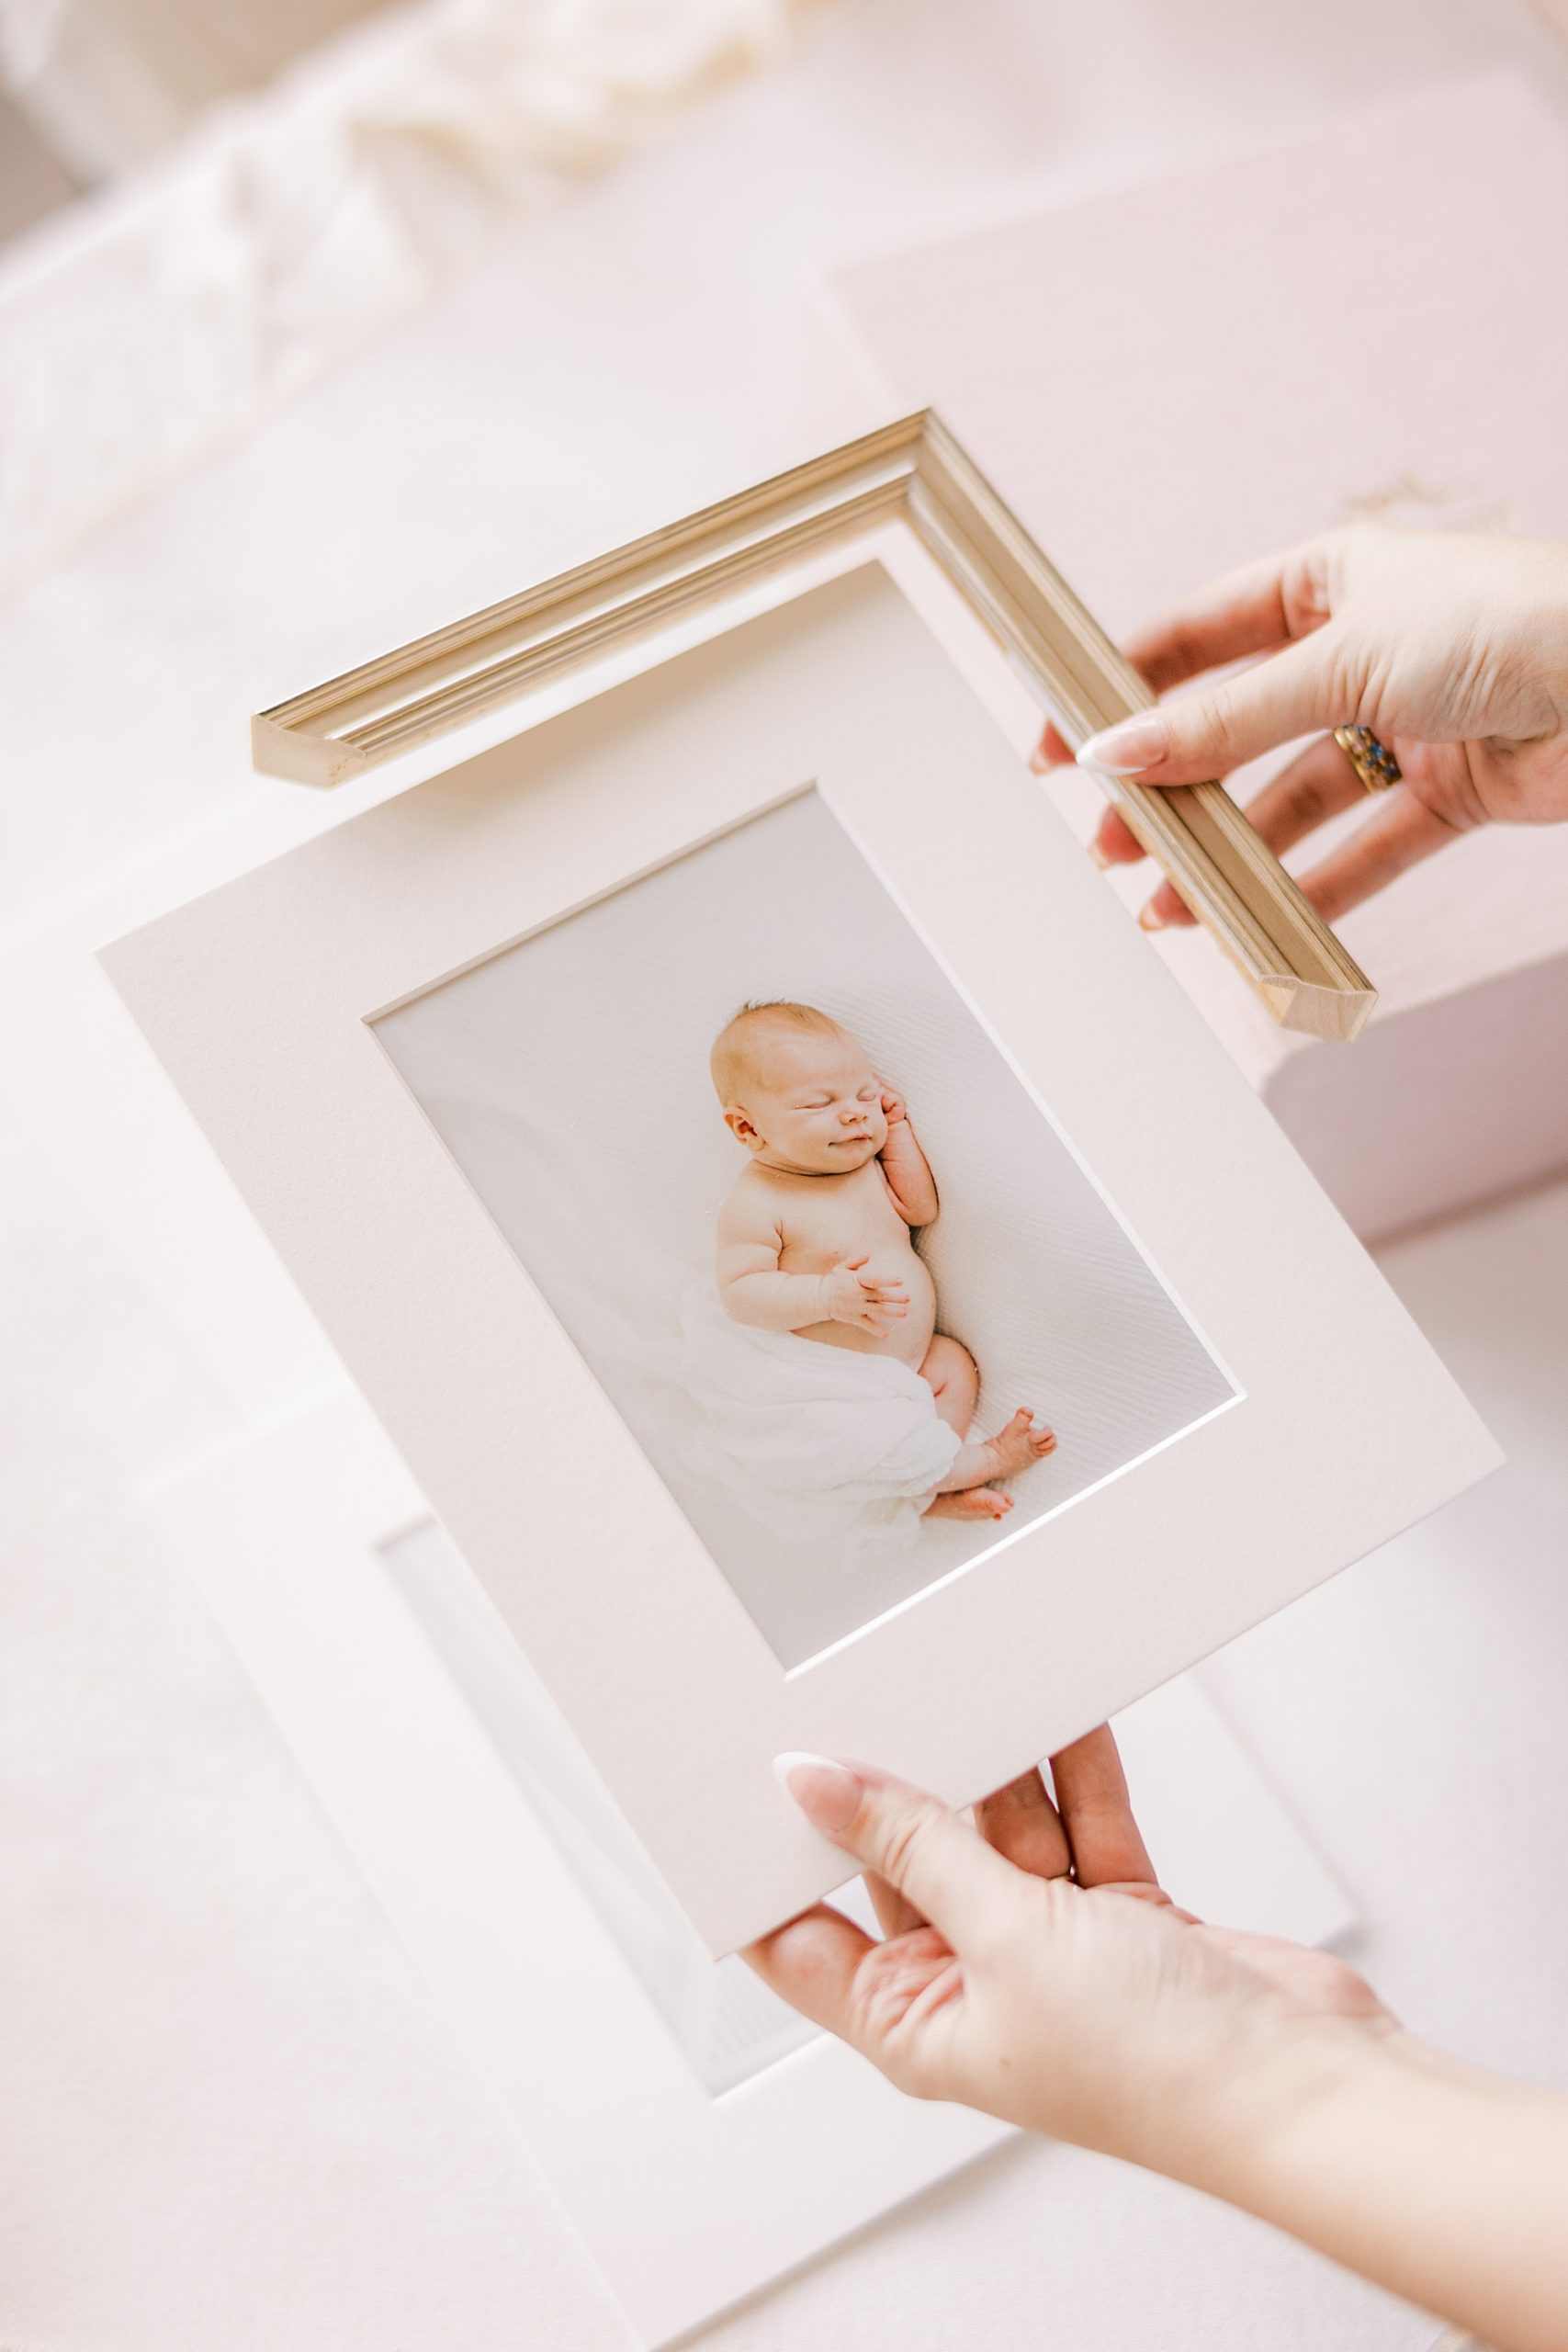 Top 3 Ways My Newborn and Family Clients Display Their Photos